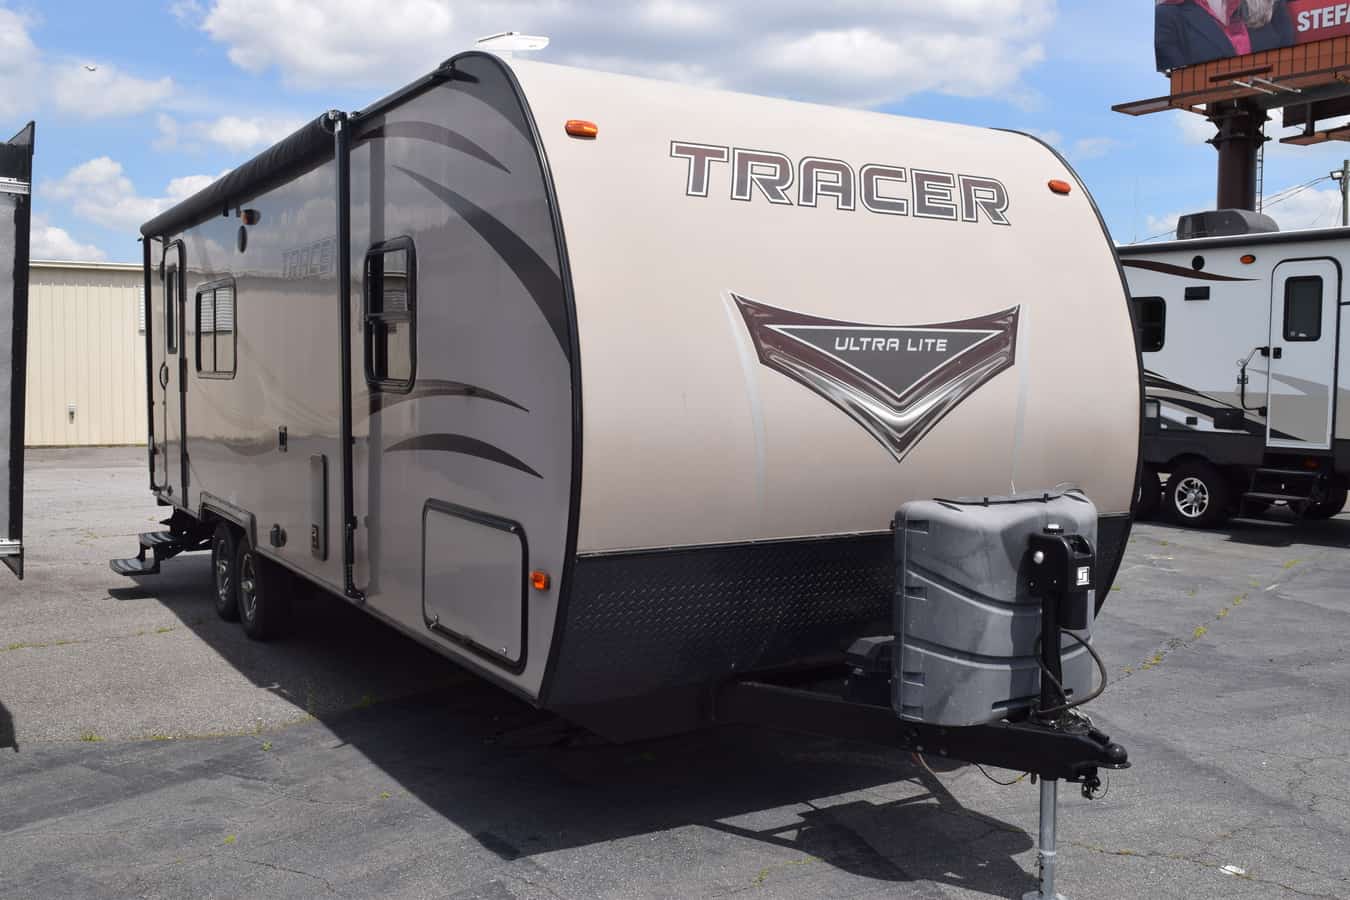 USED 2014 Prime Time TRACER 252